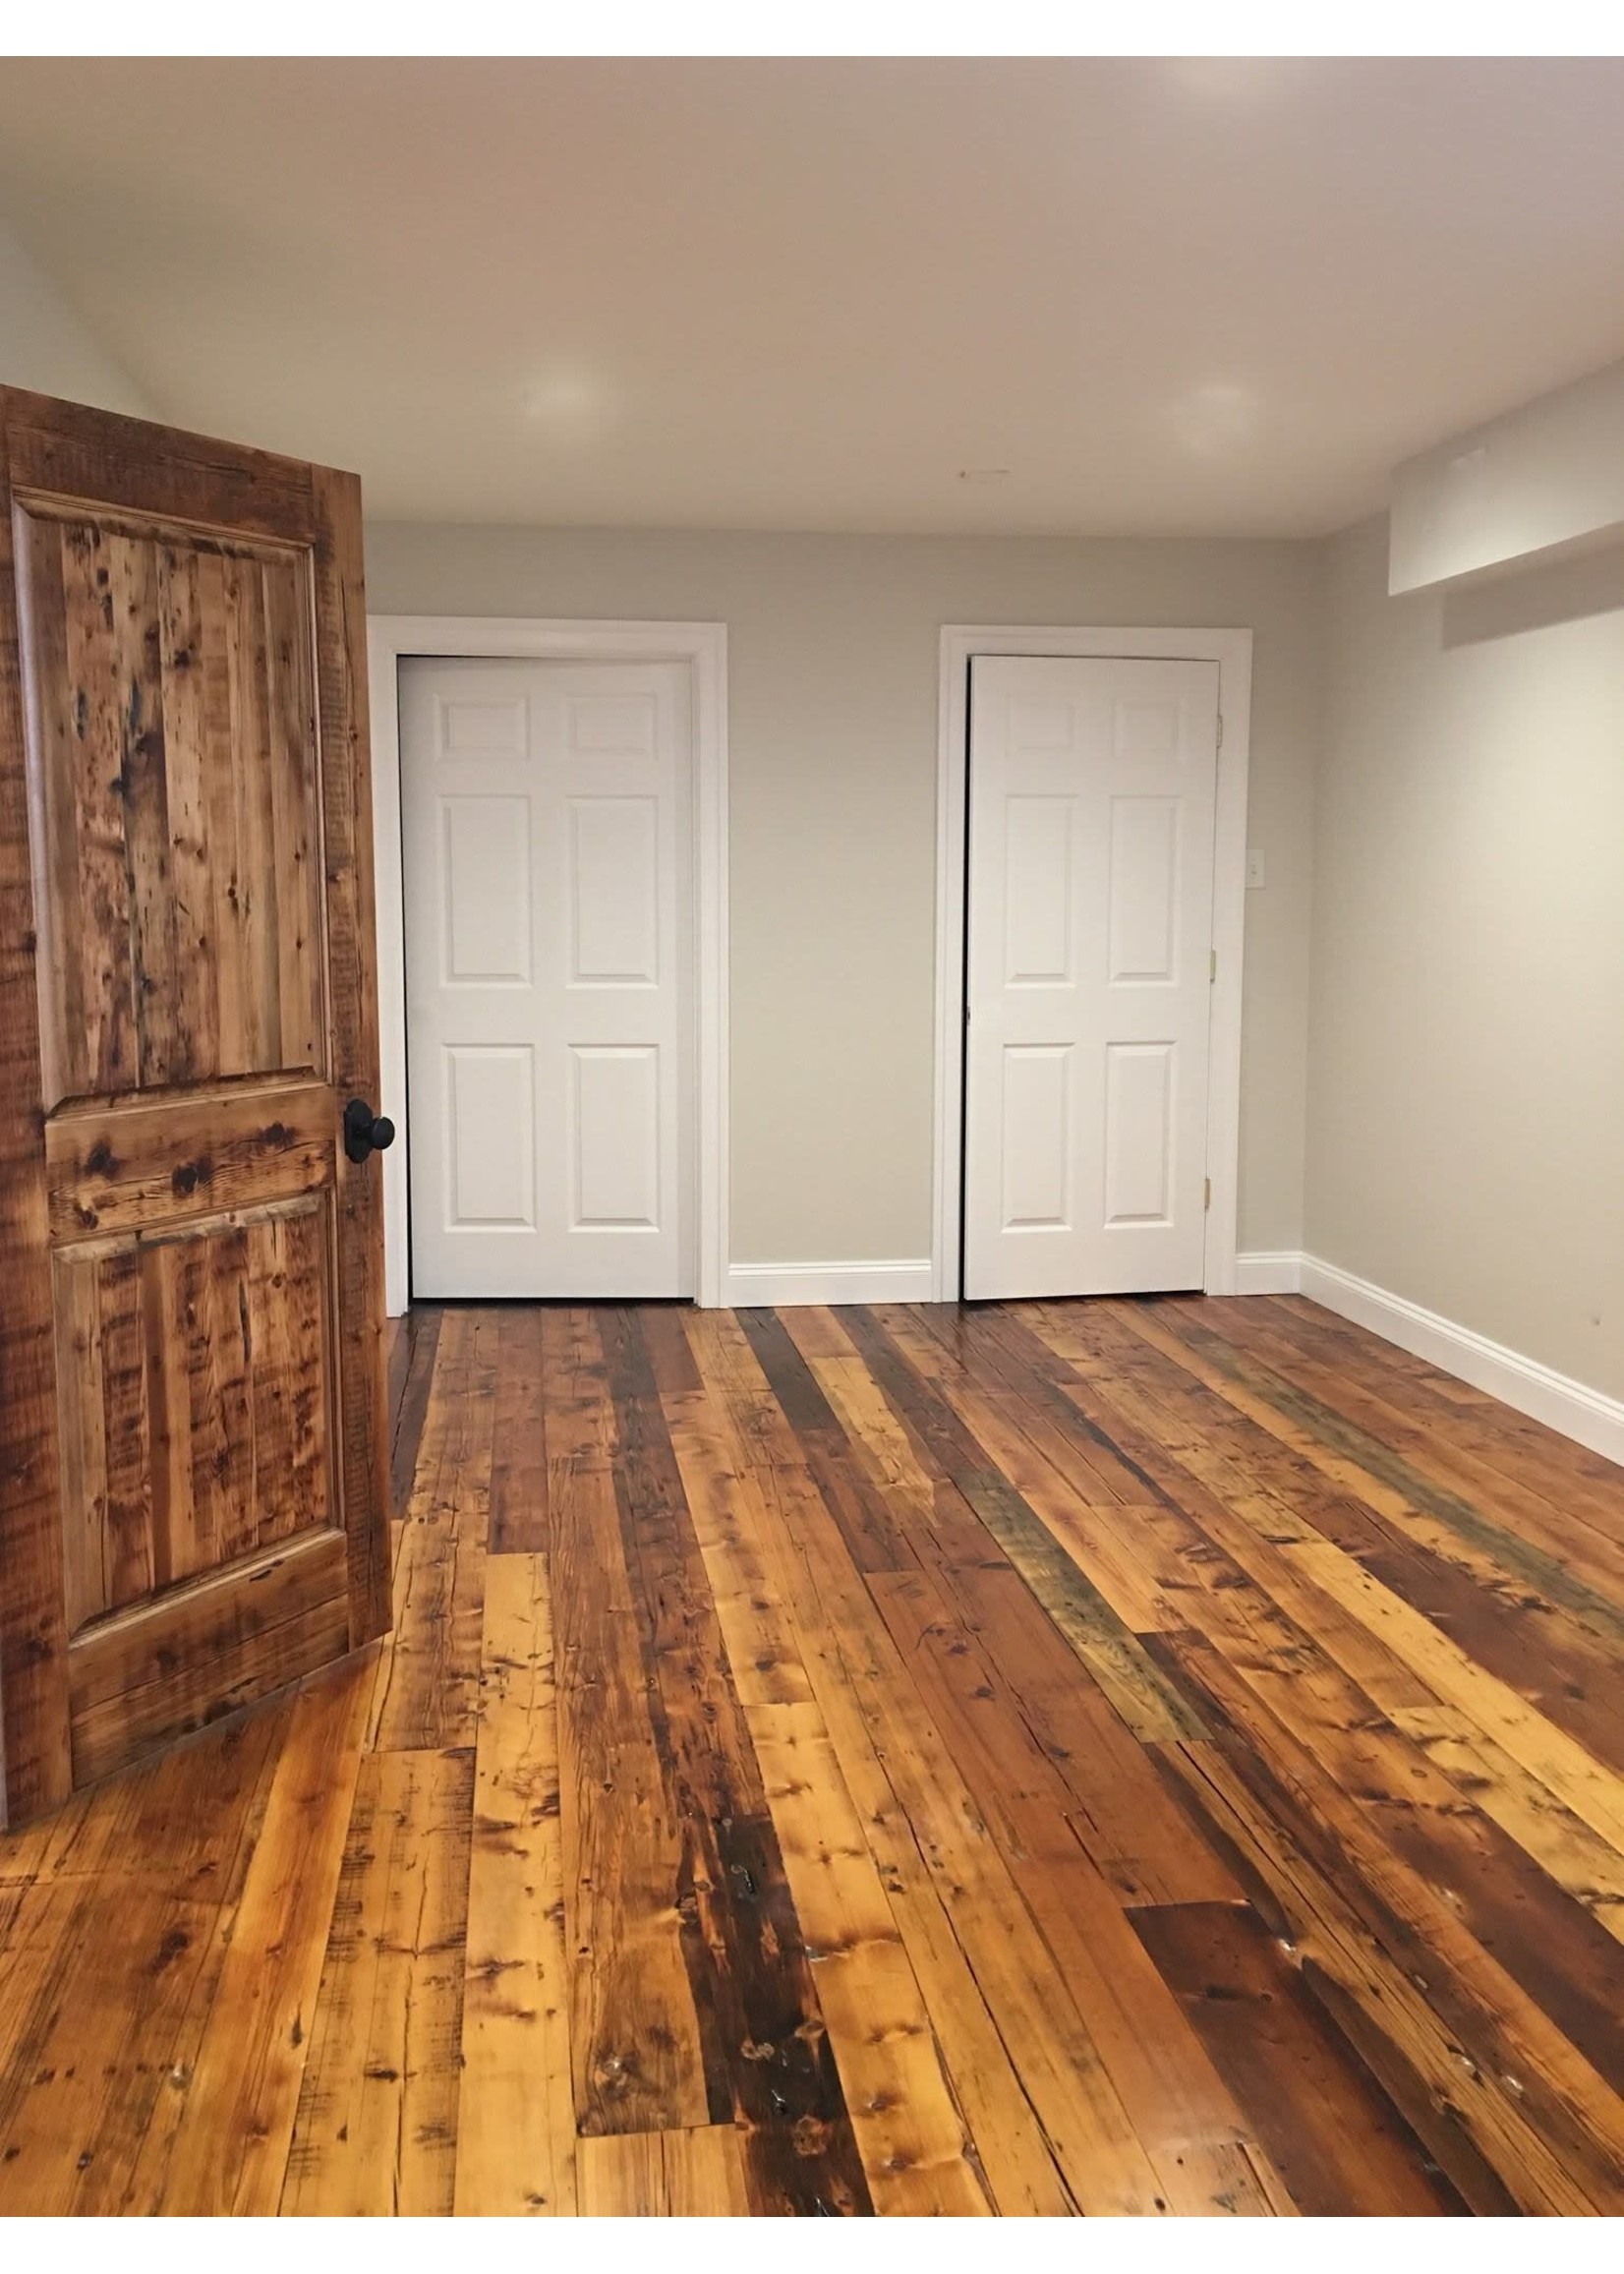 Old Wood Delaware Reclaimed Pine Flooring - Price Per Sq Ft - Unfinished Material Only